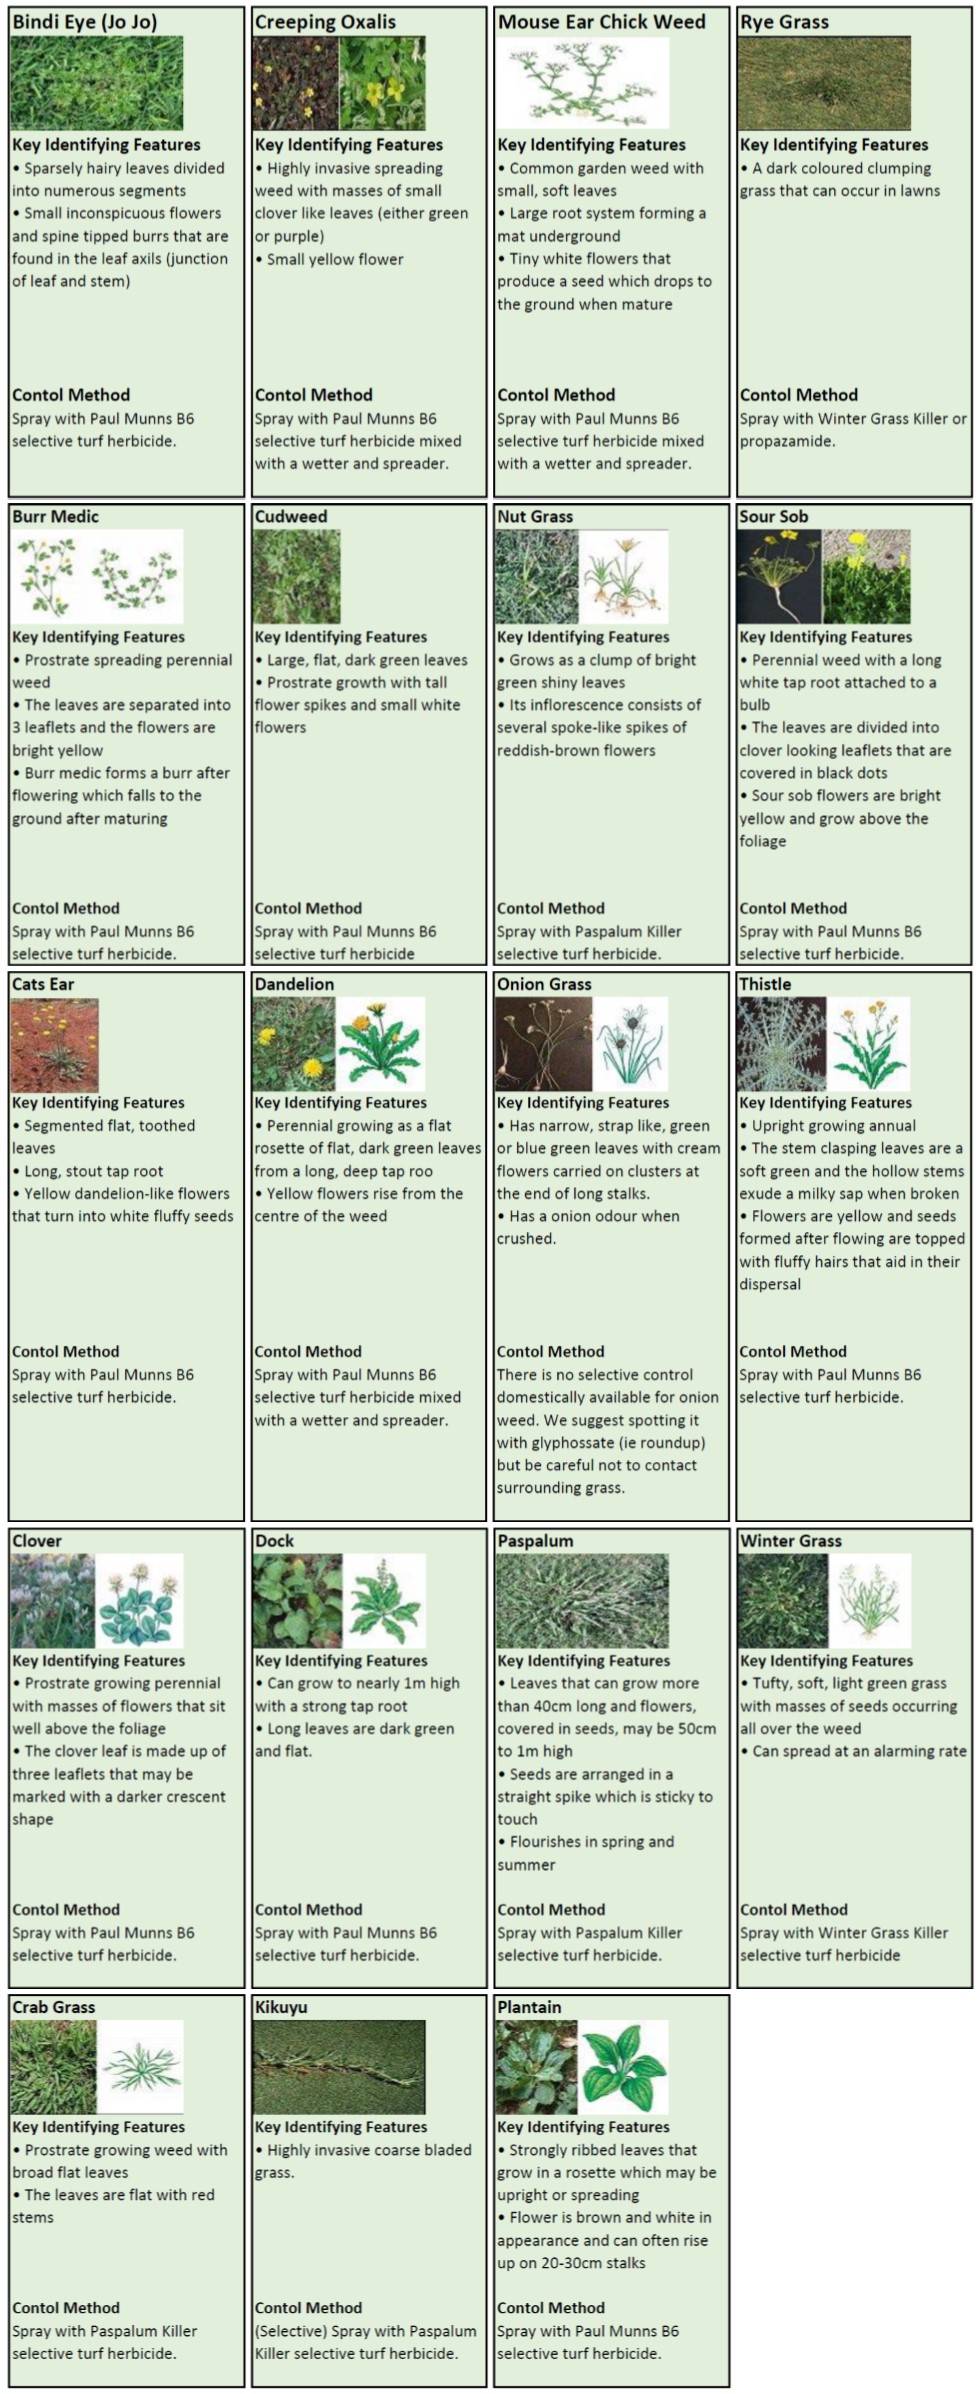 Paul Munns Blog Weeds Category Weed Identification Chart